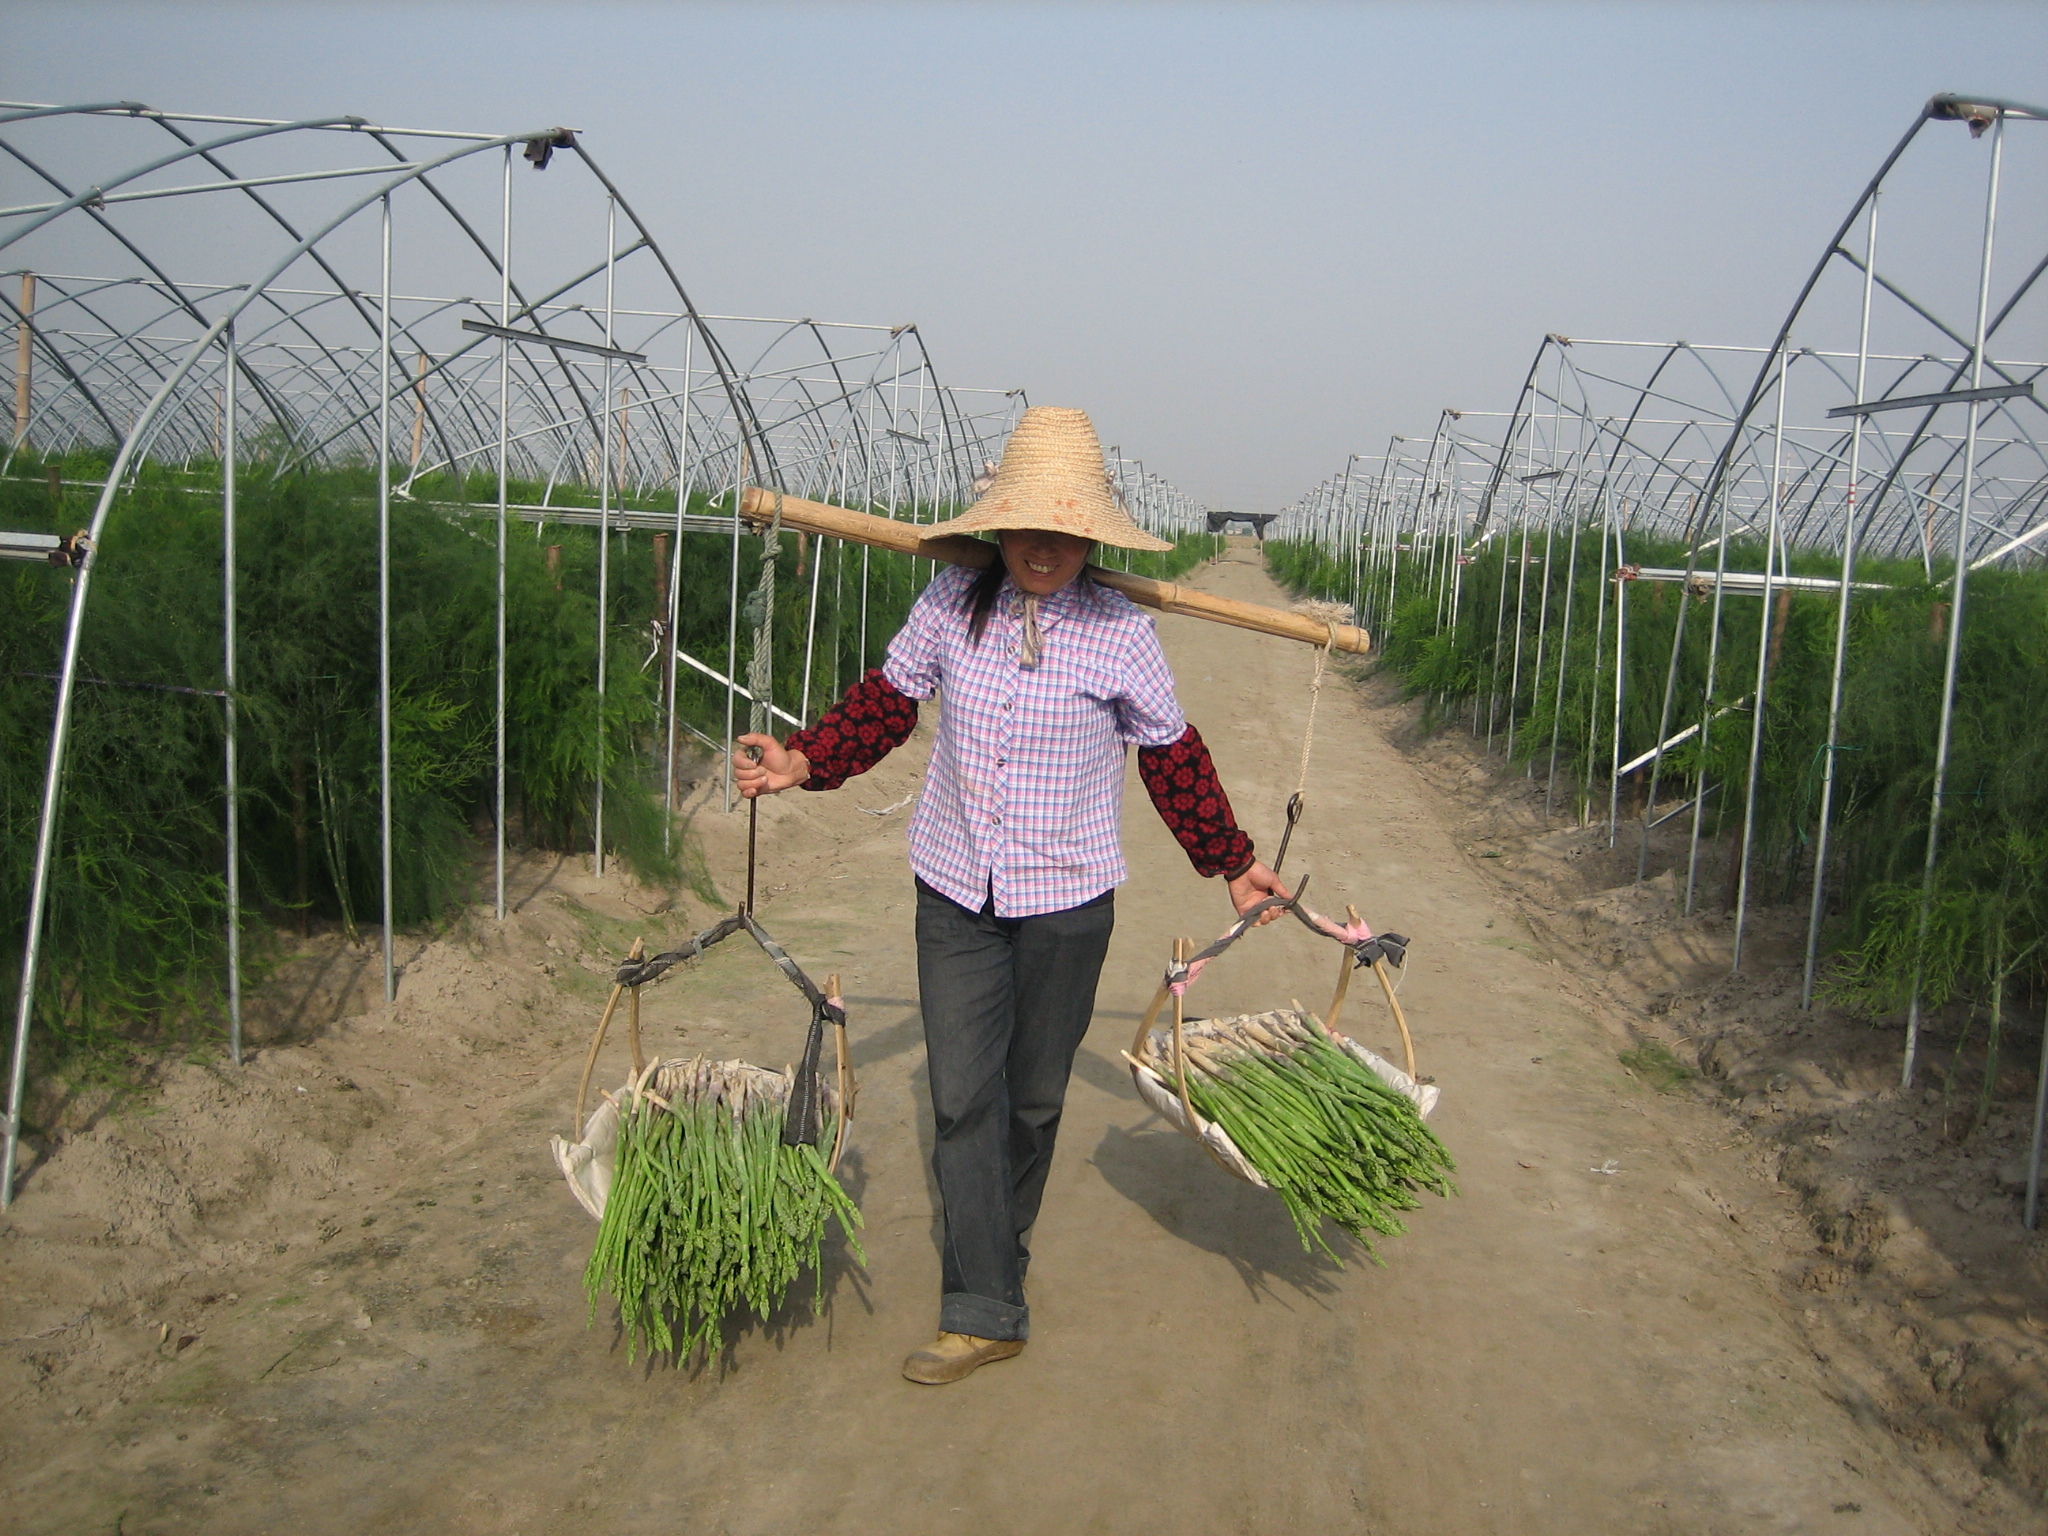 Long harvests, extensive daylight and high yields in China